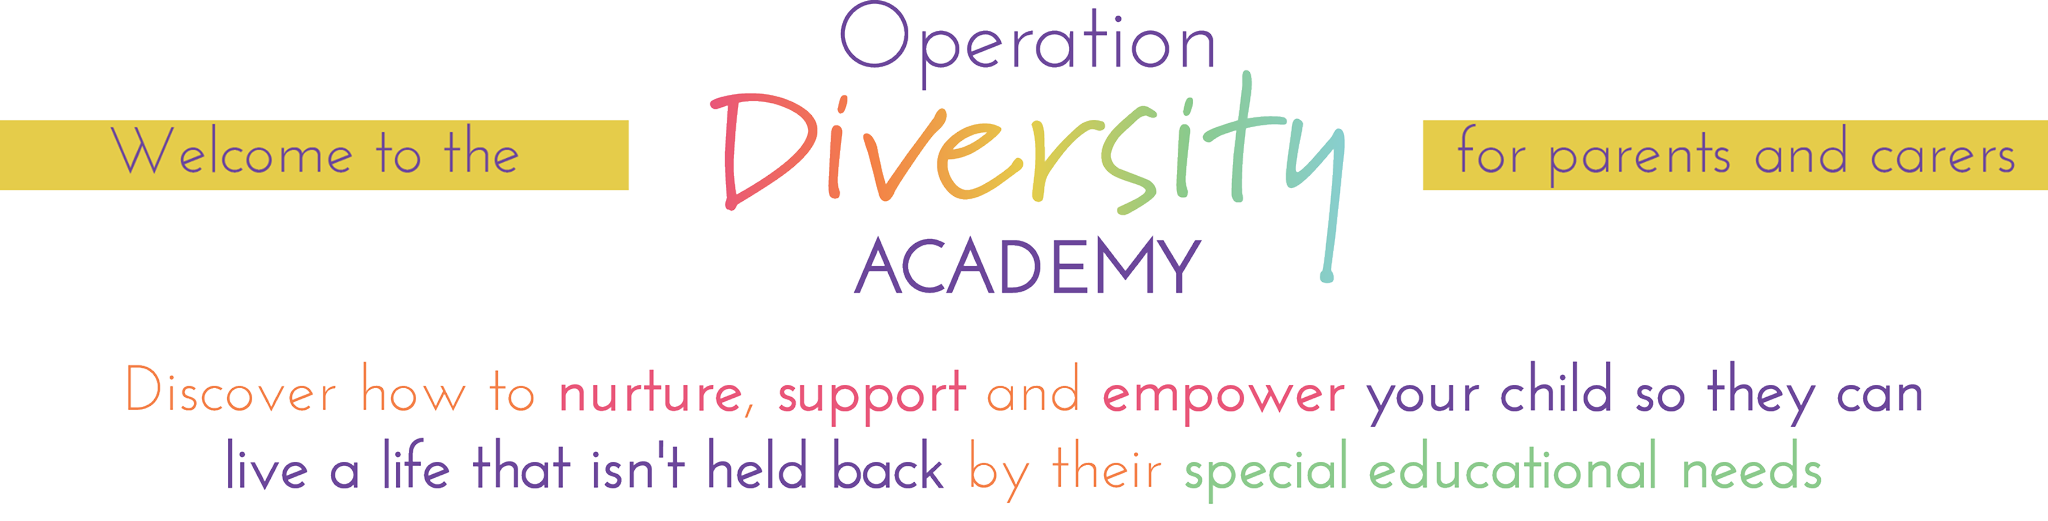 diversity clipart special educational need